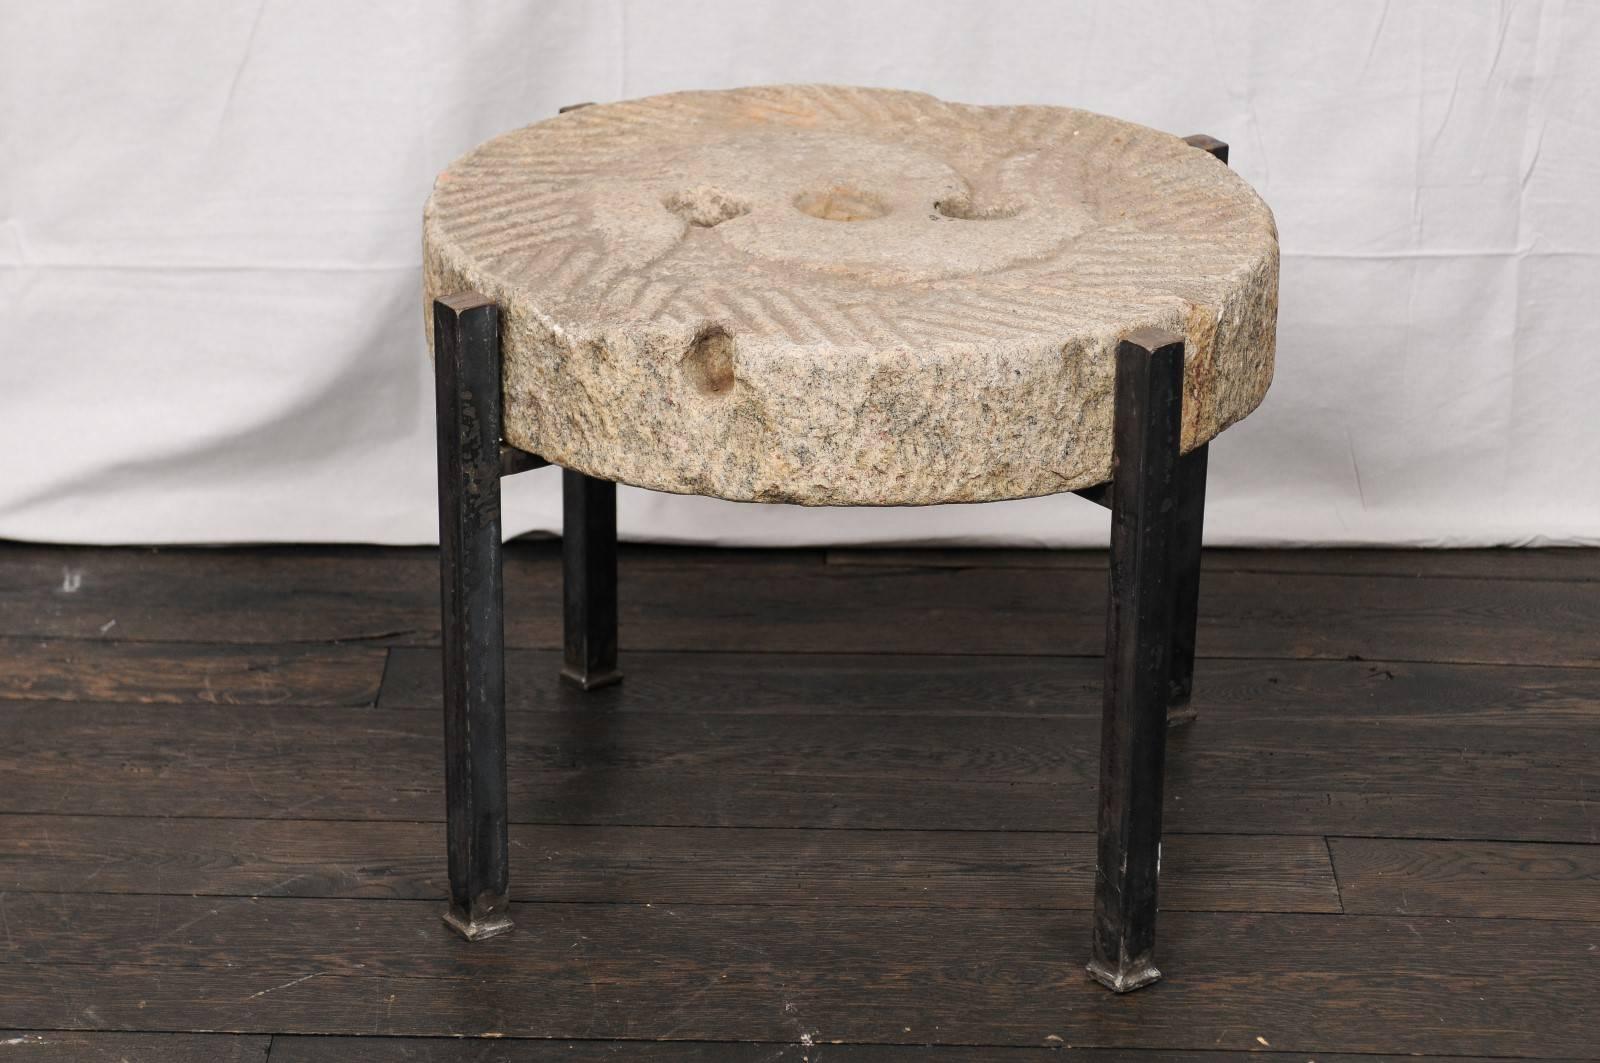 19th Century European Millstone Grinding Surface Made Drink Table on Iron Base 1